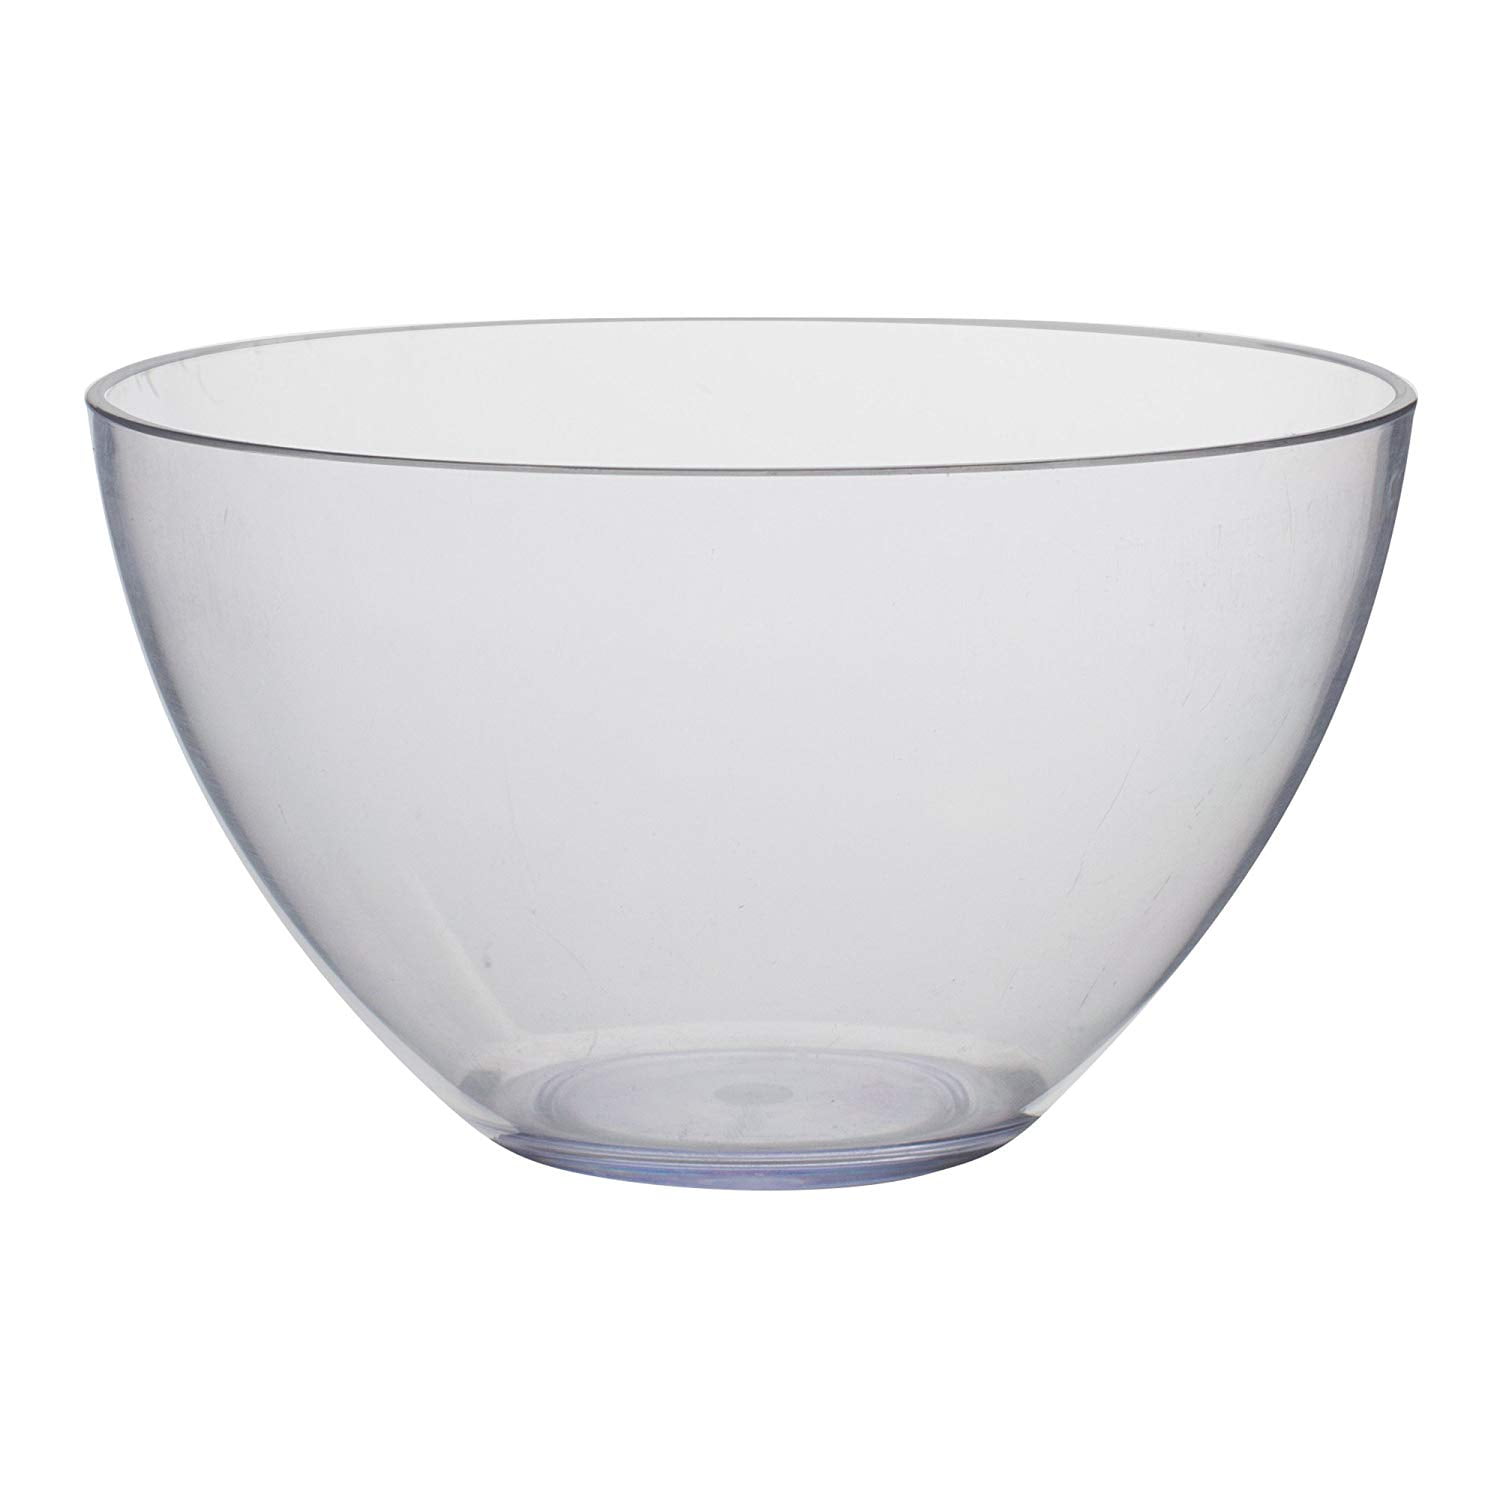 Pack of 6 FREE-FREE USA MJ1MB-1-0 Double Wall Salad Bowl 5 